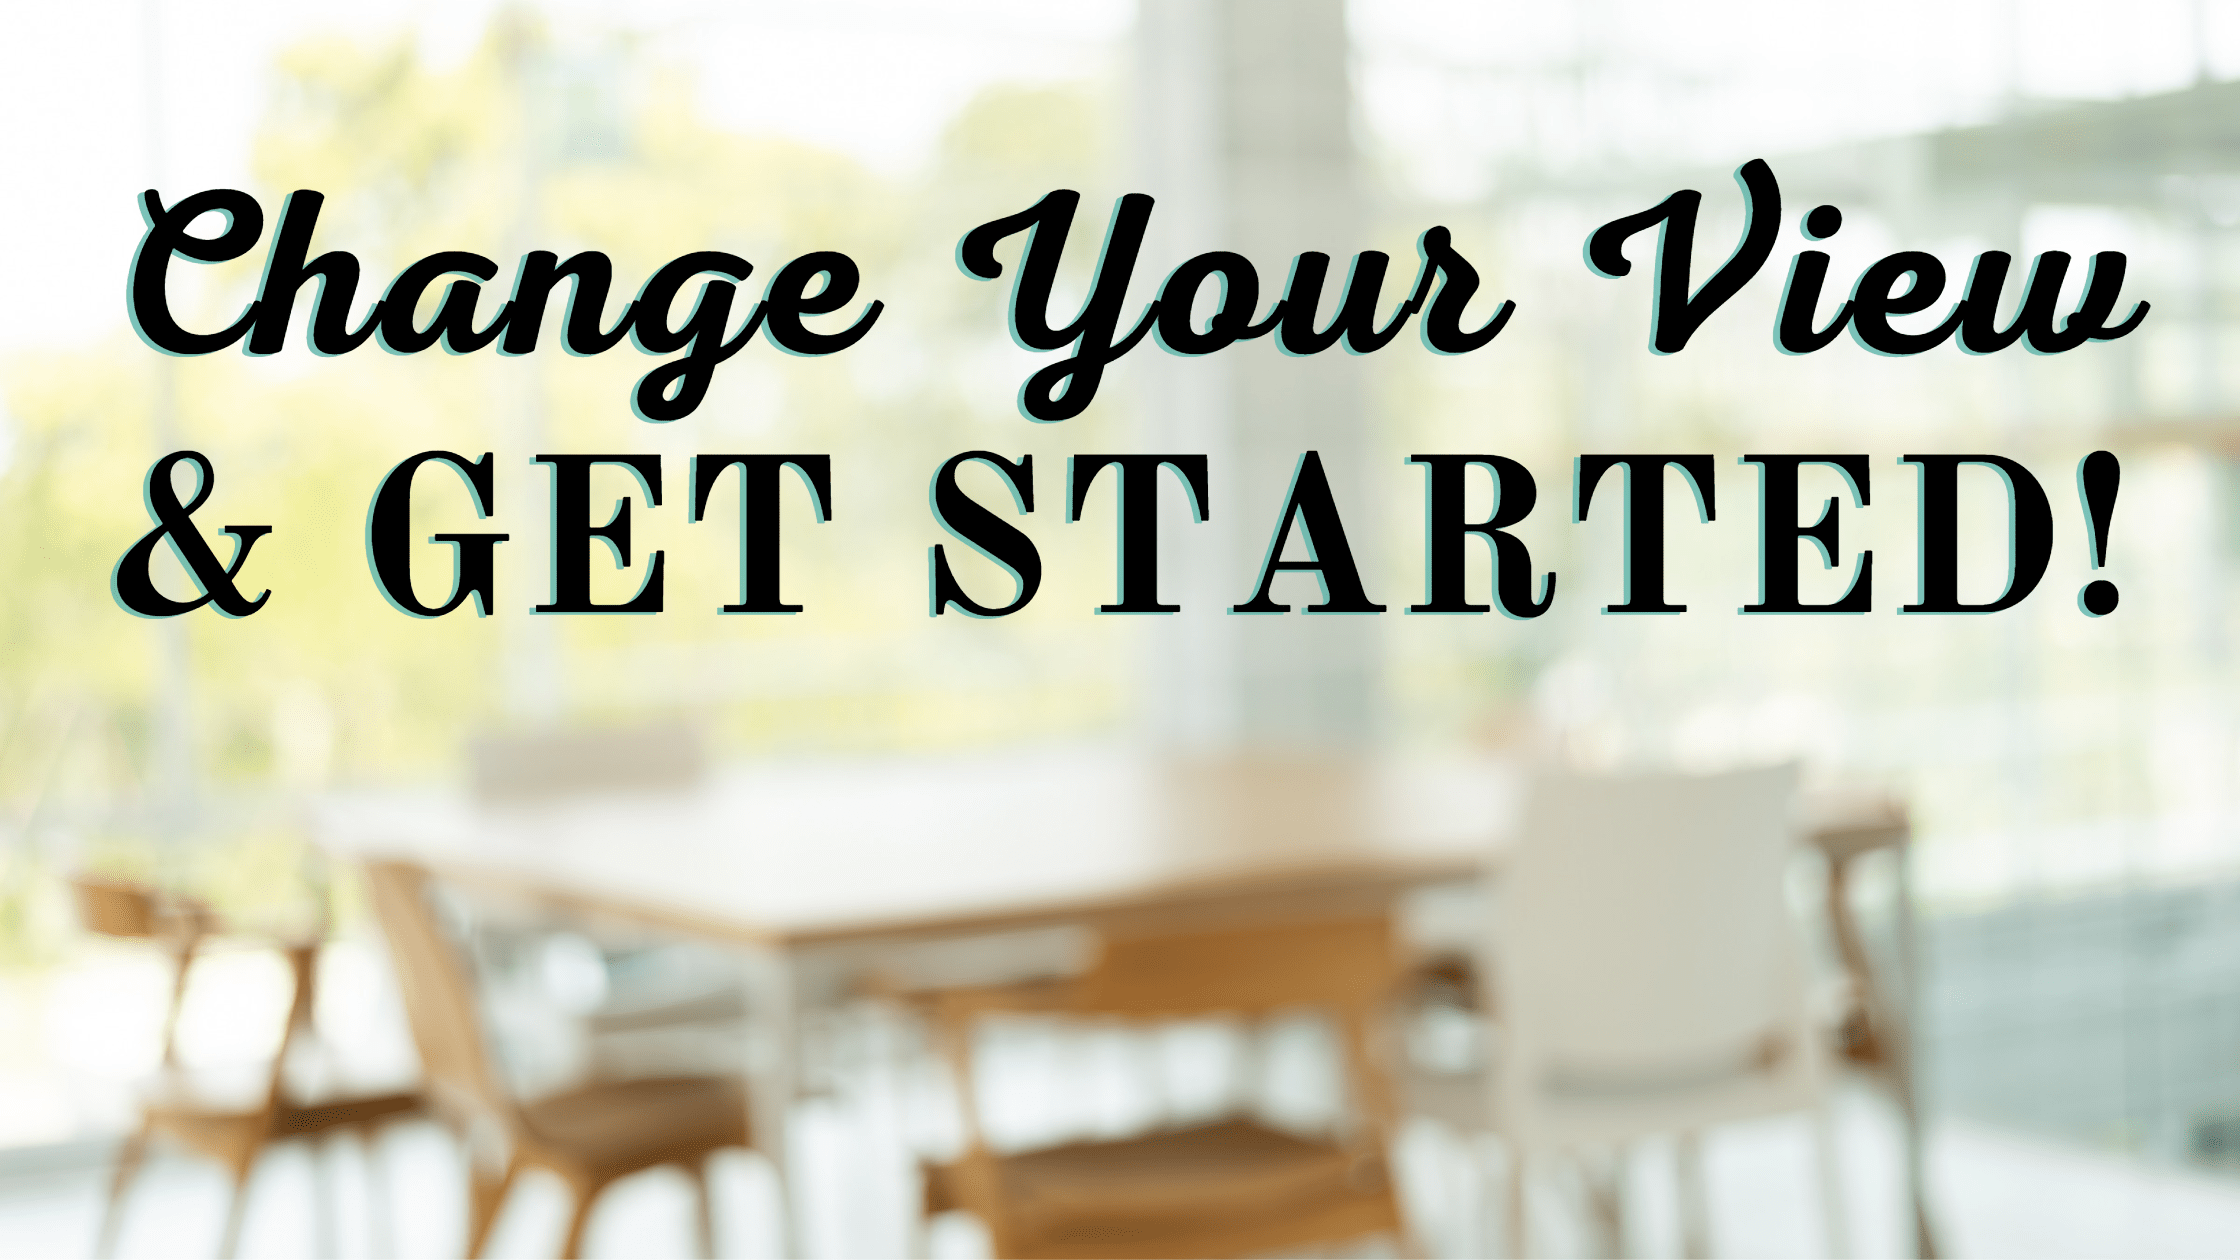 Change your view and get started!